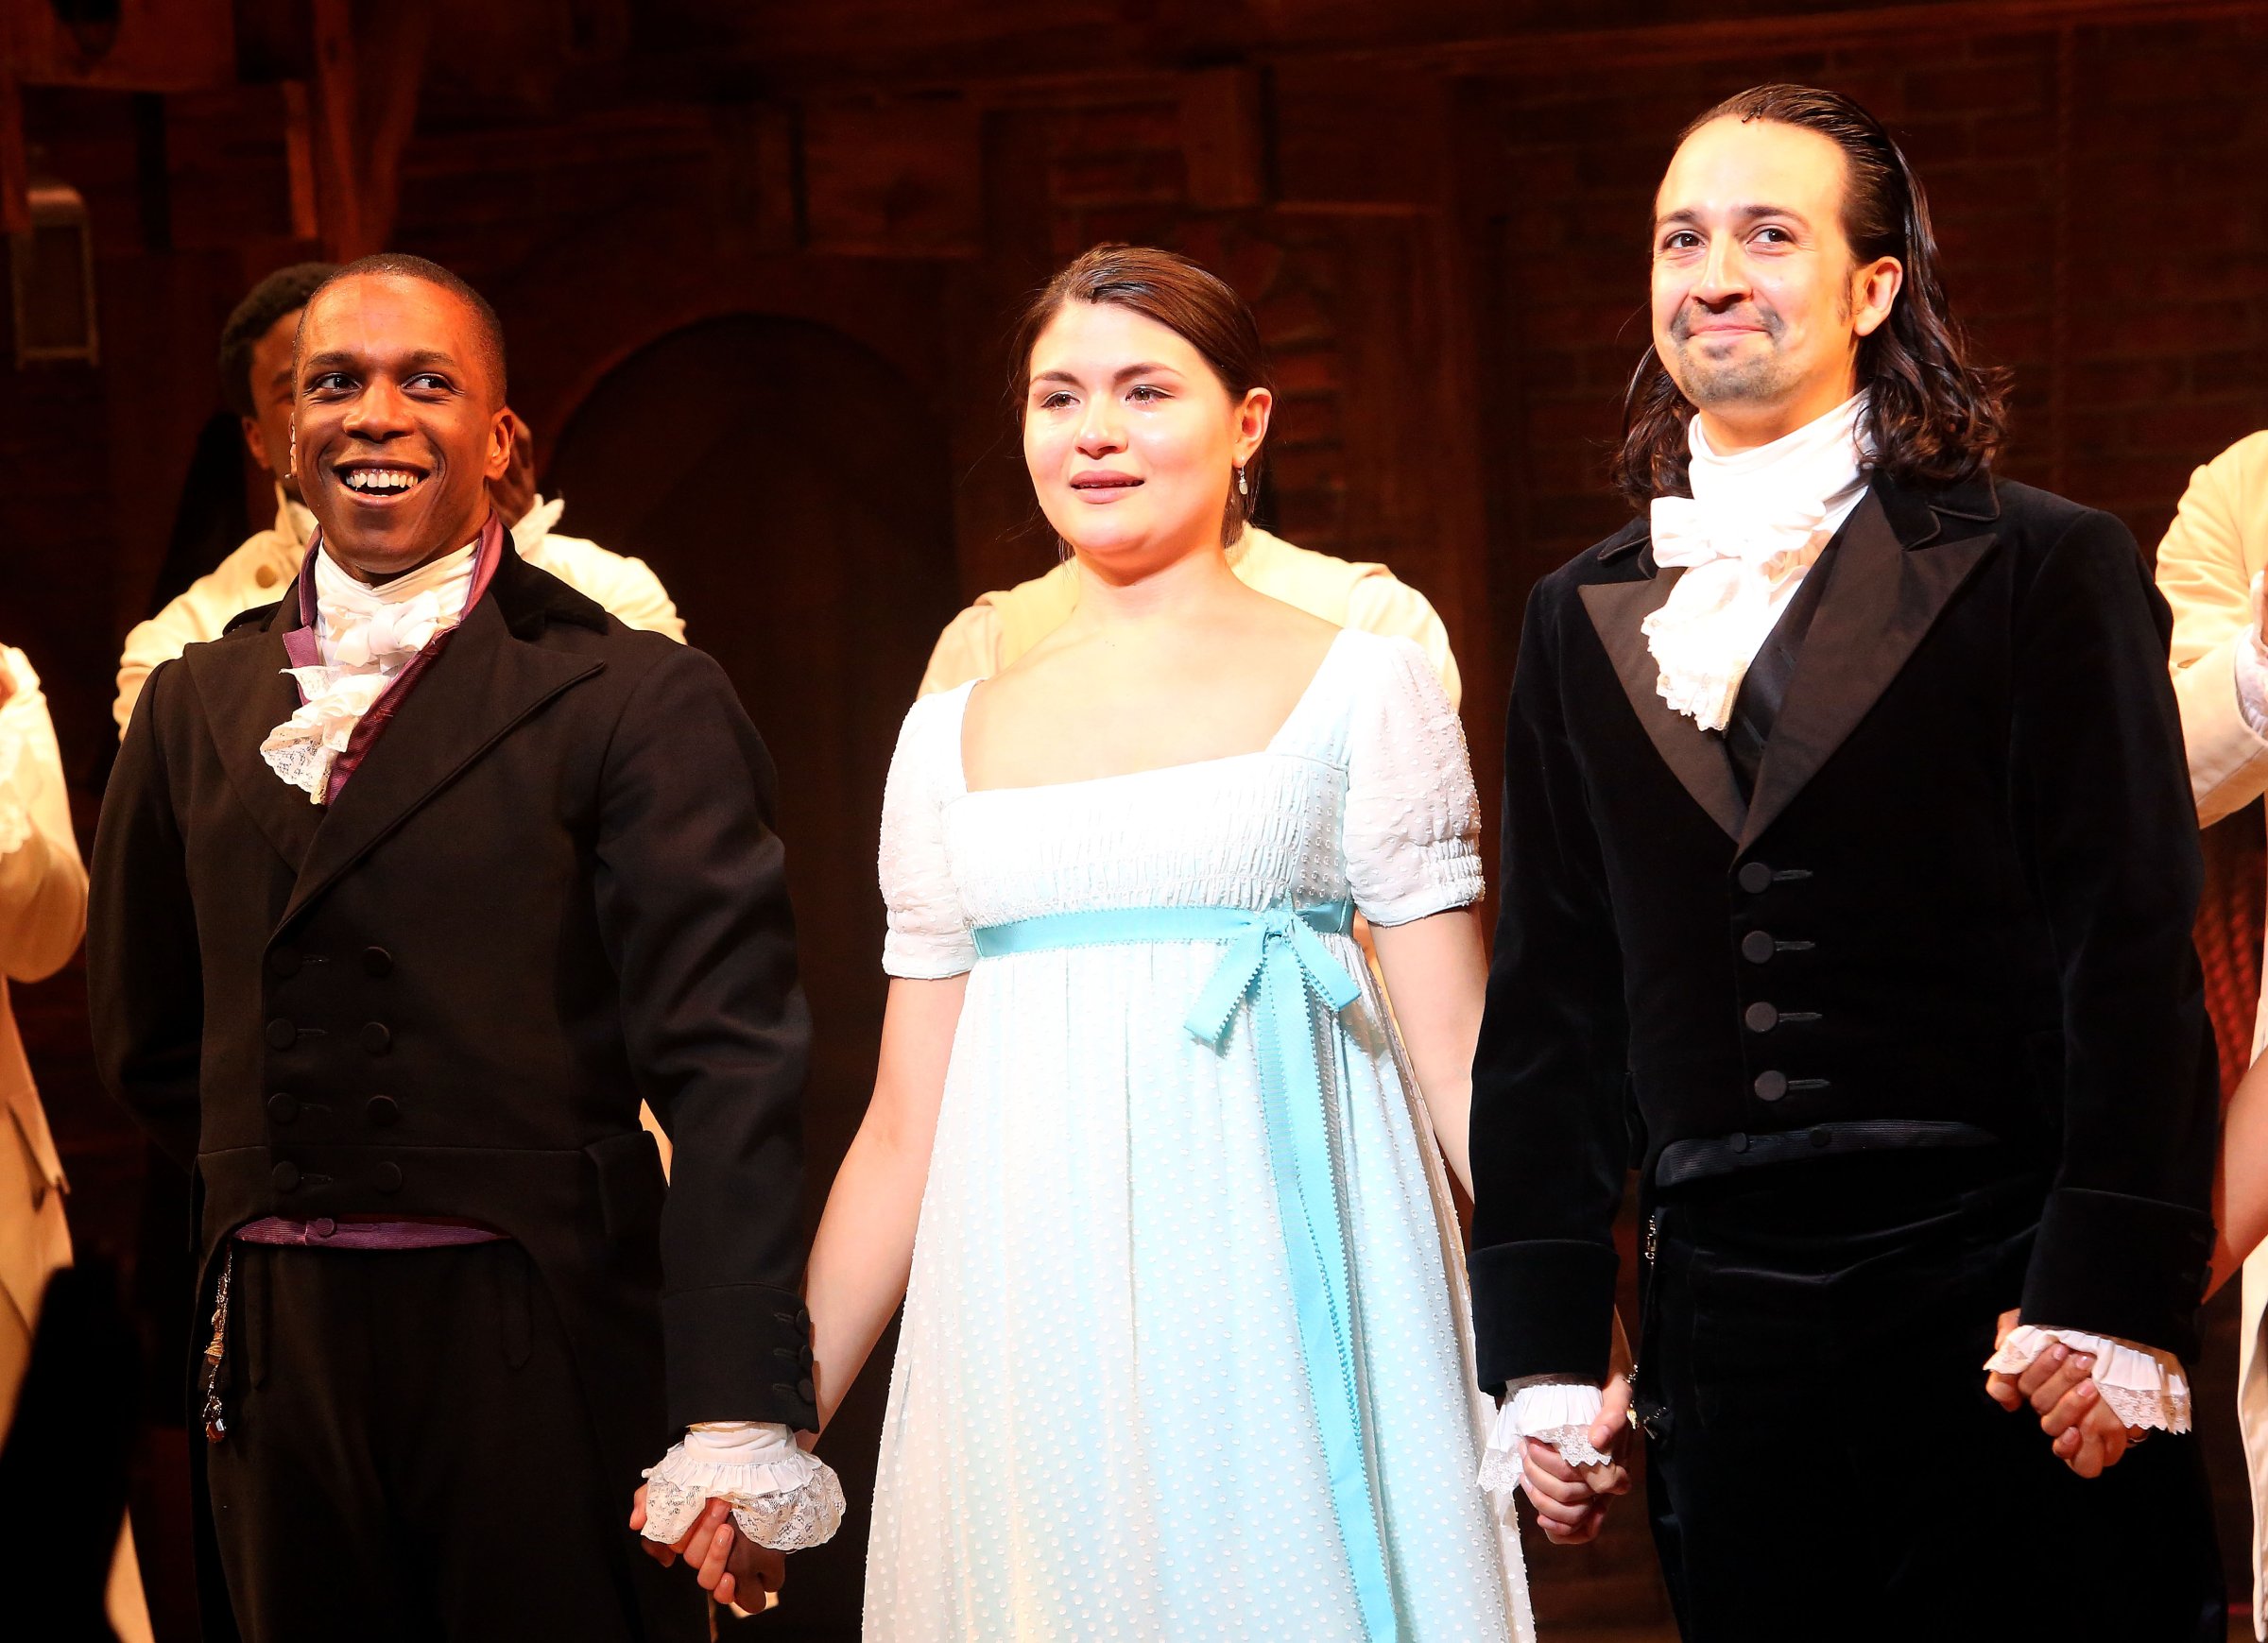 "Hamilton" on Broadway at The Richard Rogers Theatre in New York City on July 9, 2016.